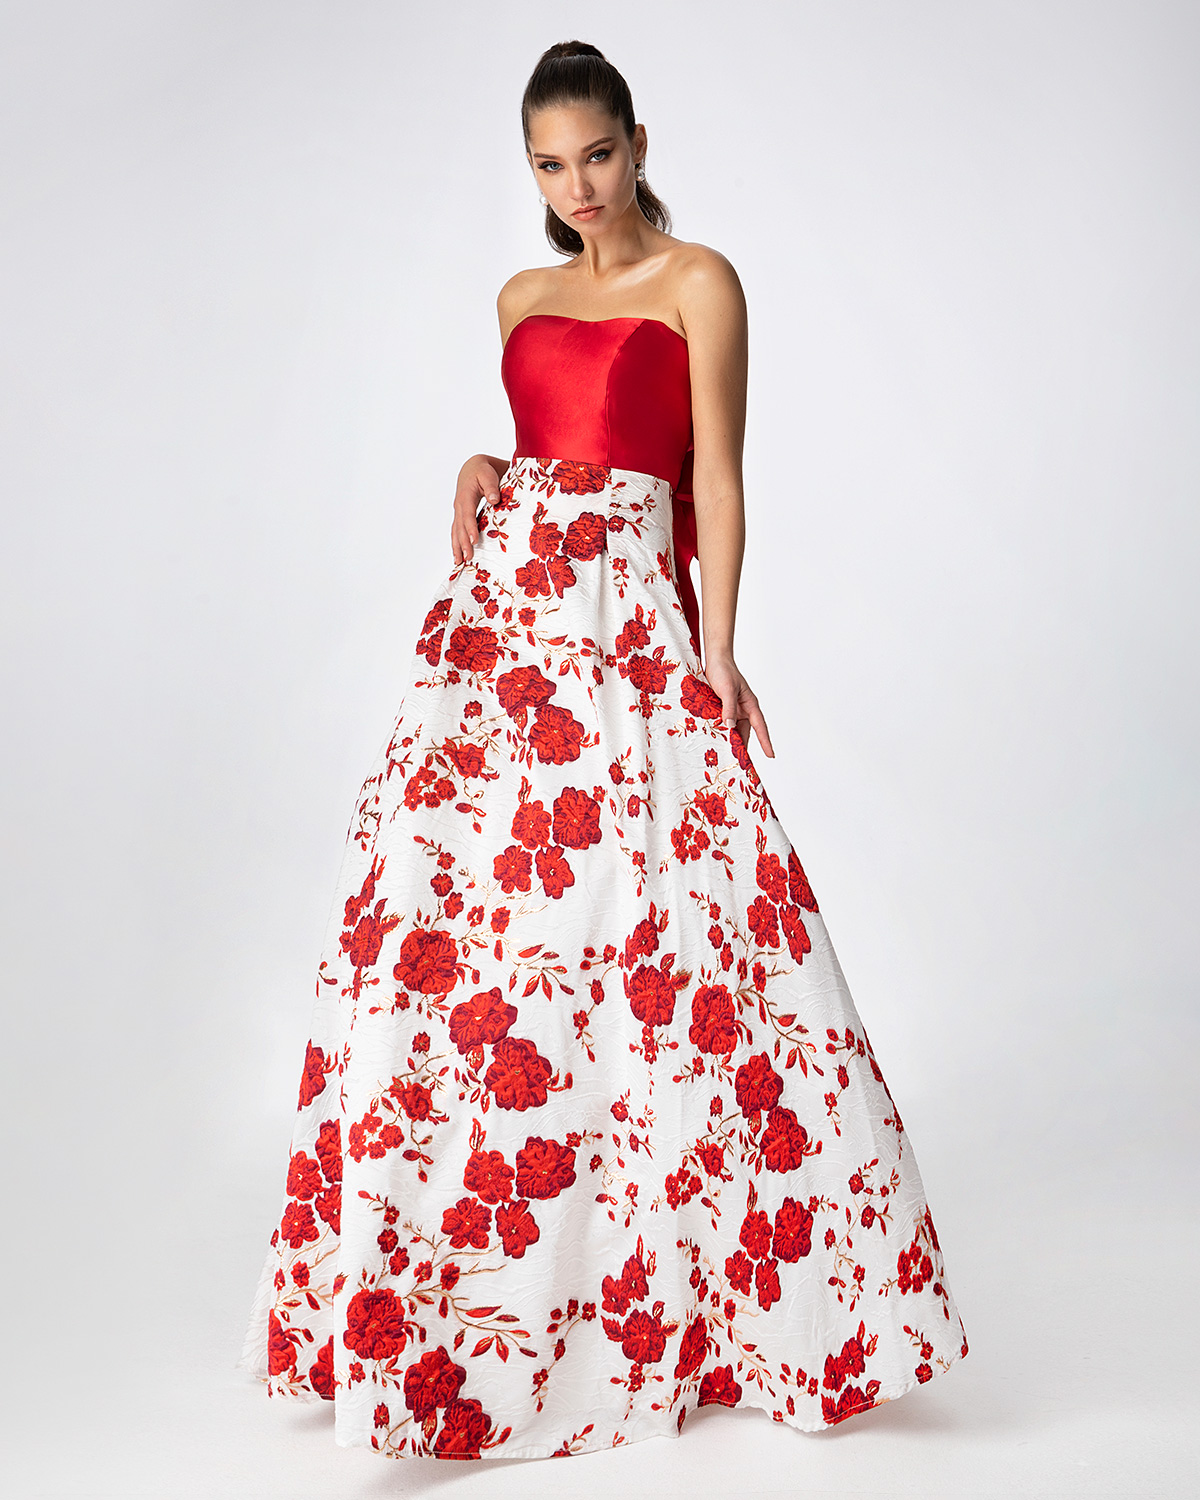 Коктейльные платья / Long printed brocade skirt with solid color top and big bow in the back